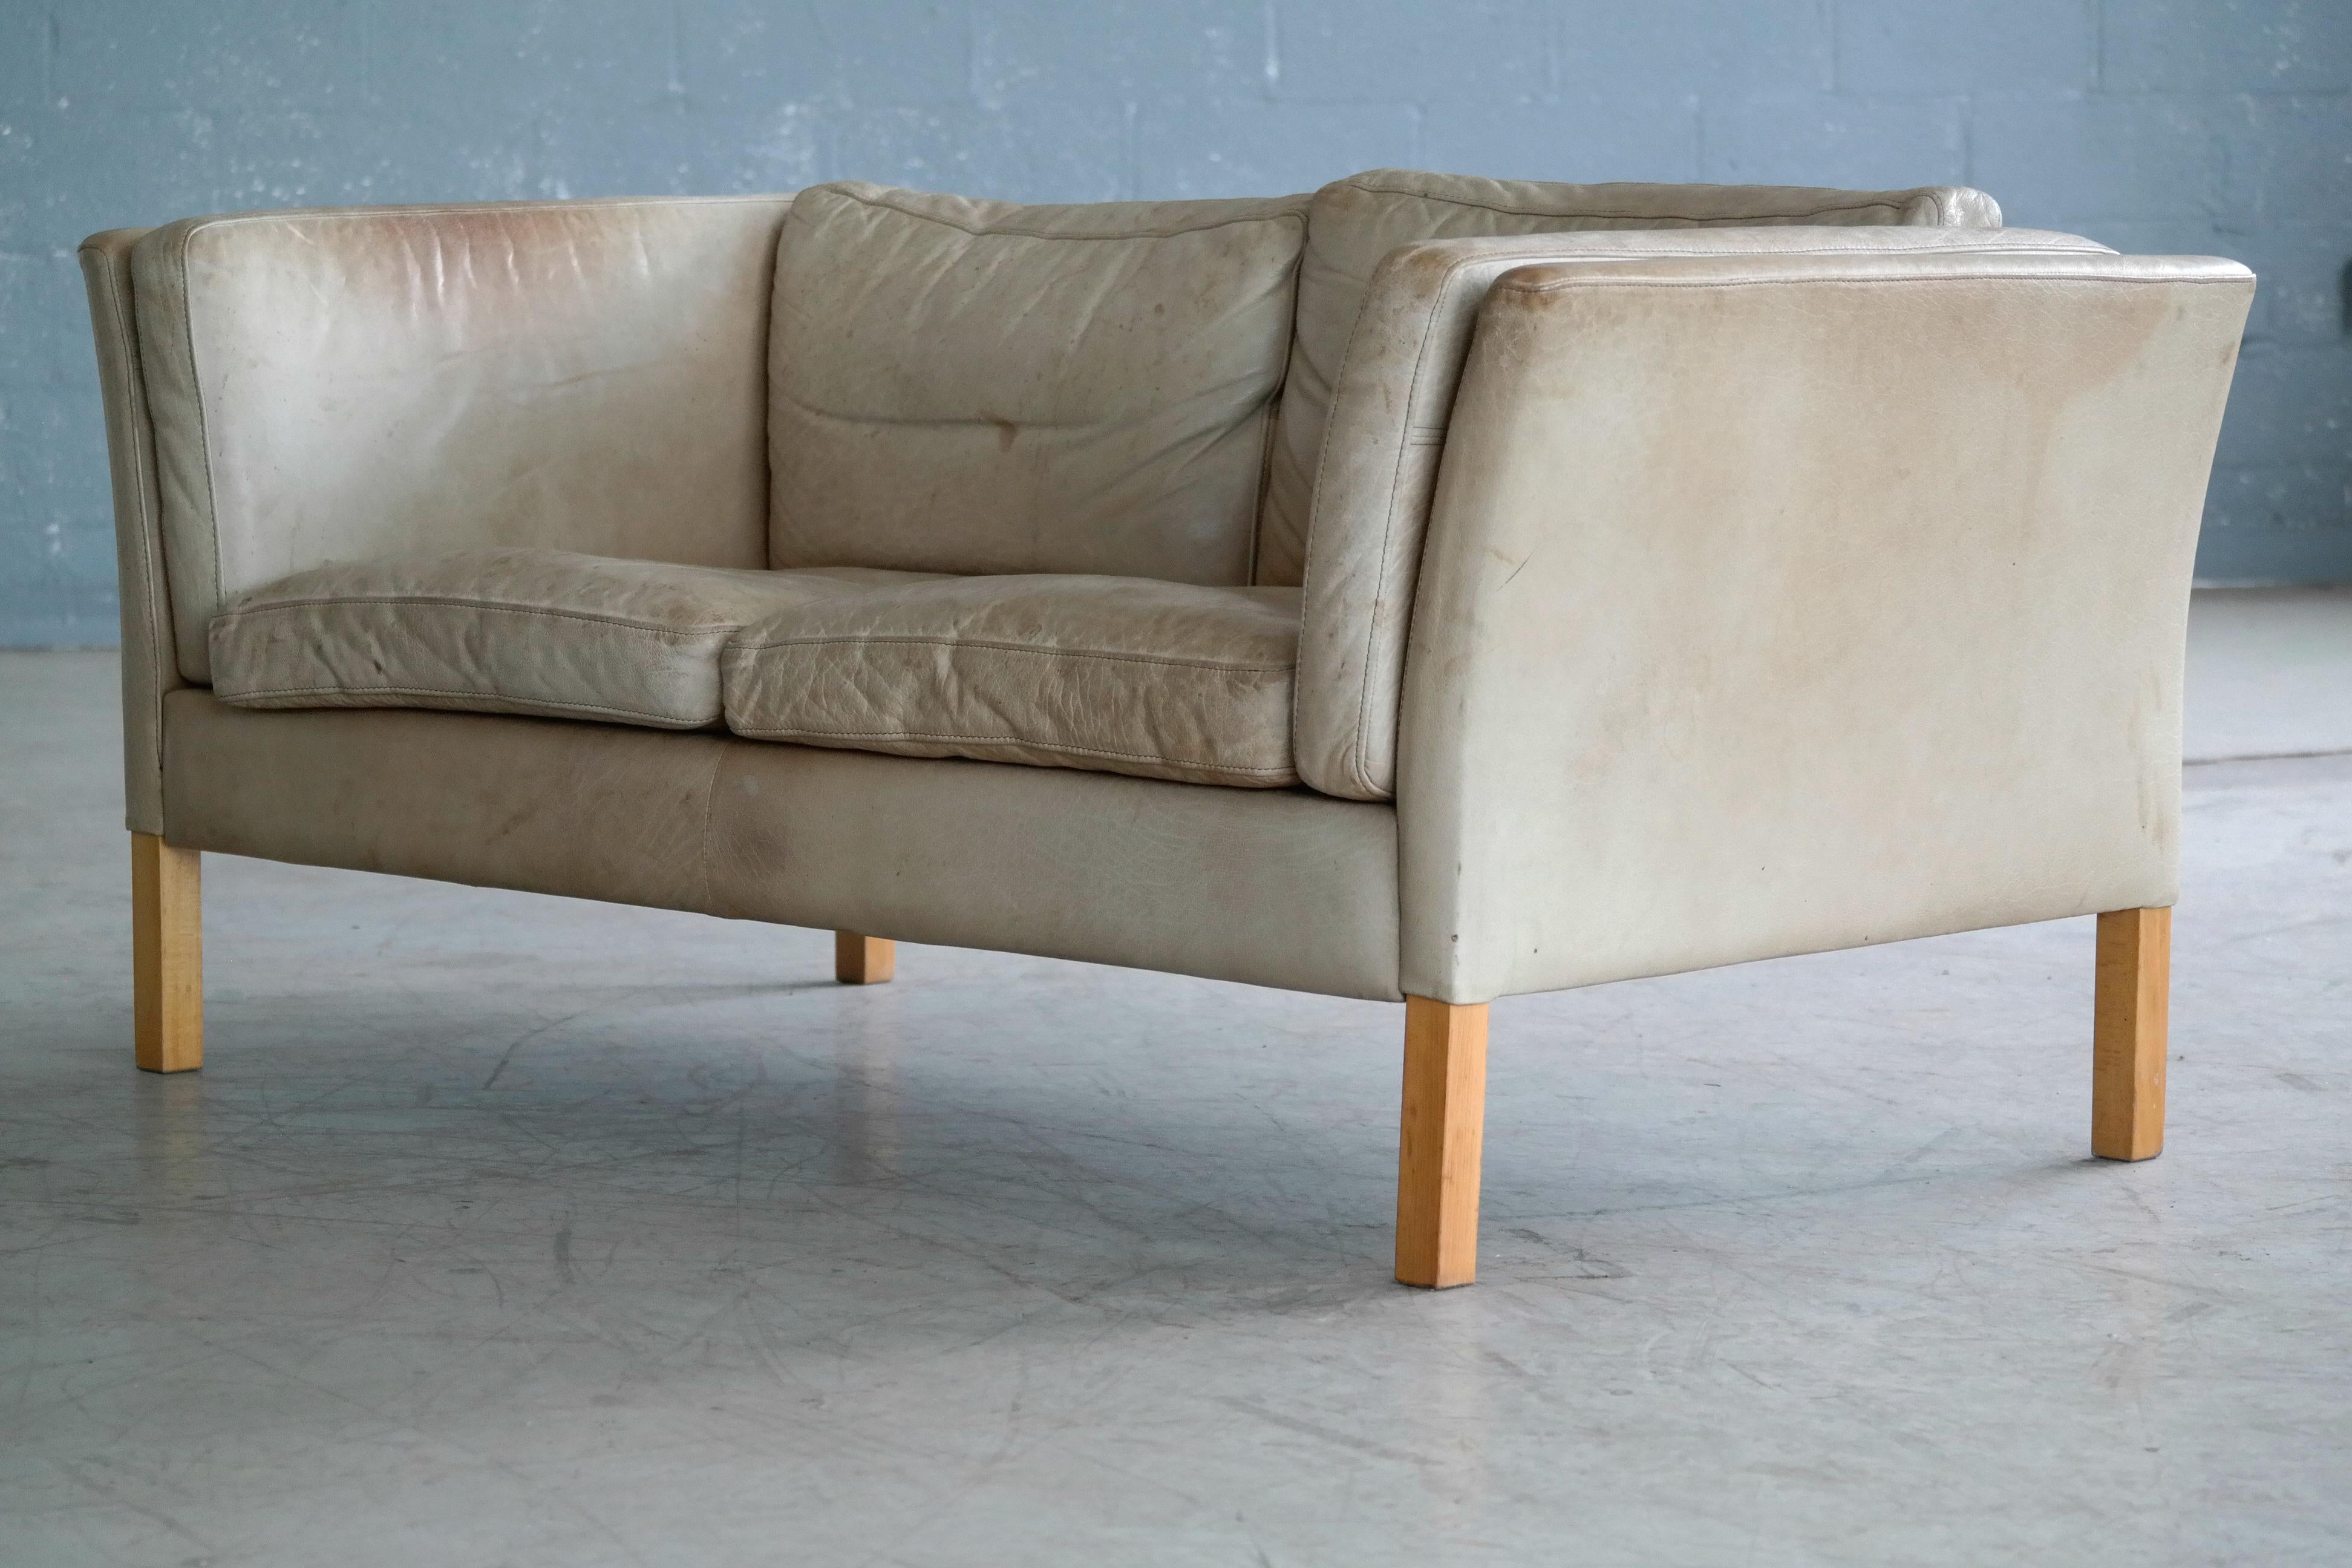 Danish Borge Mogensen Style Two-Seat Sofa in Tan Patinated Leather by Stouby